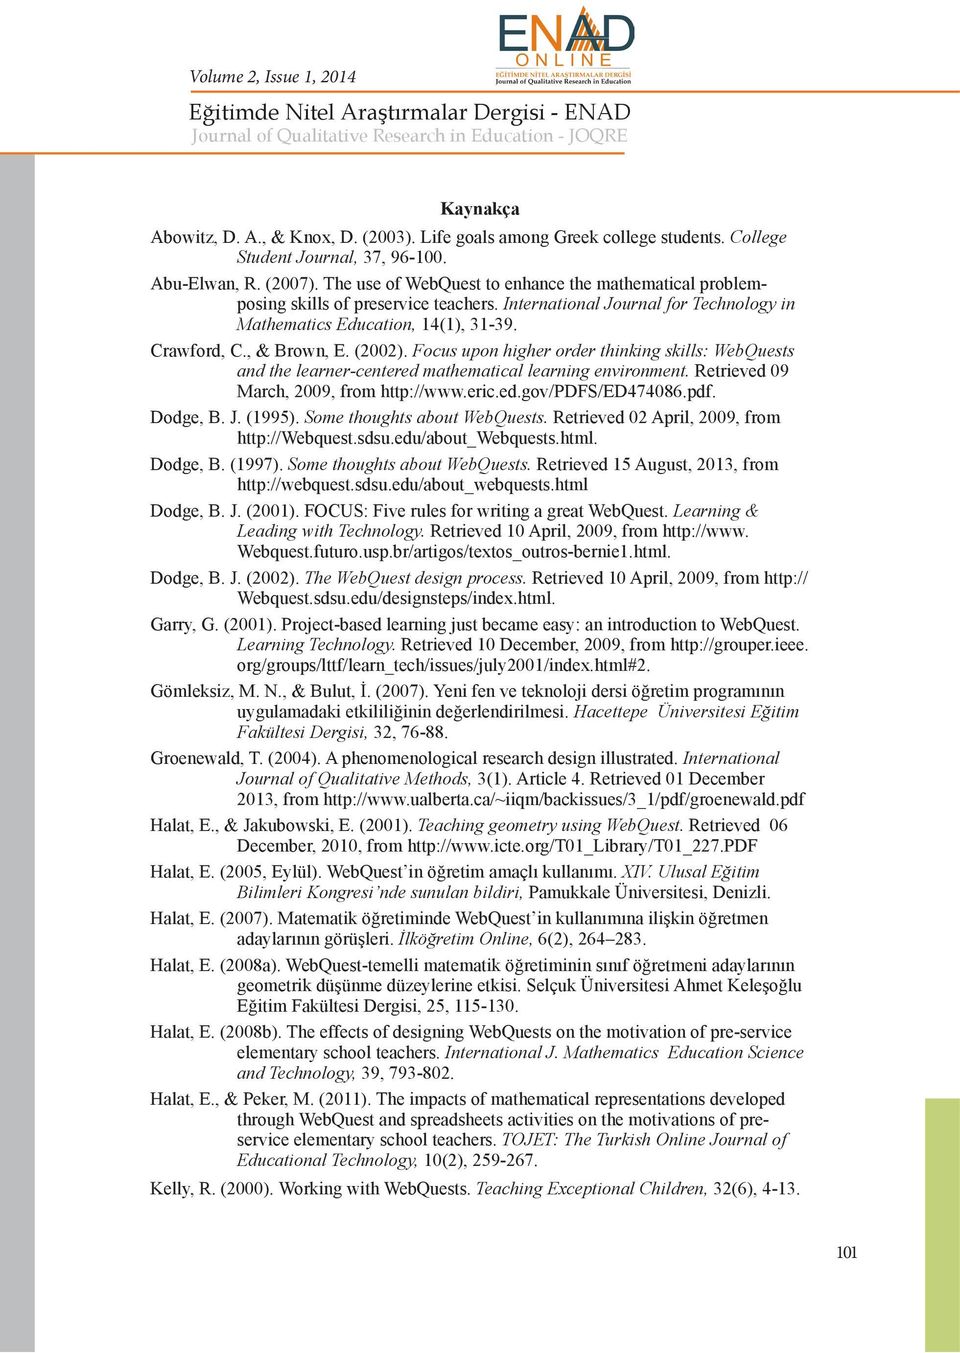 (2002). Focus upon higher order thinking skills: WebQuests and the learner-centered mathematical learning environment. Retrieved 09 March, 2009, from http://www.eric.ed.gov/pdfs/ed474086.pdf. Dodge, B.